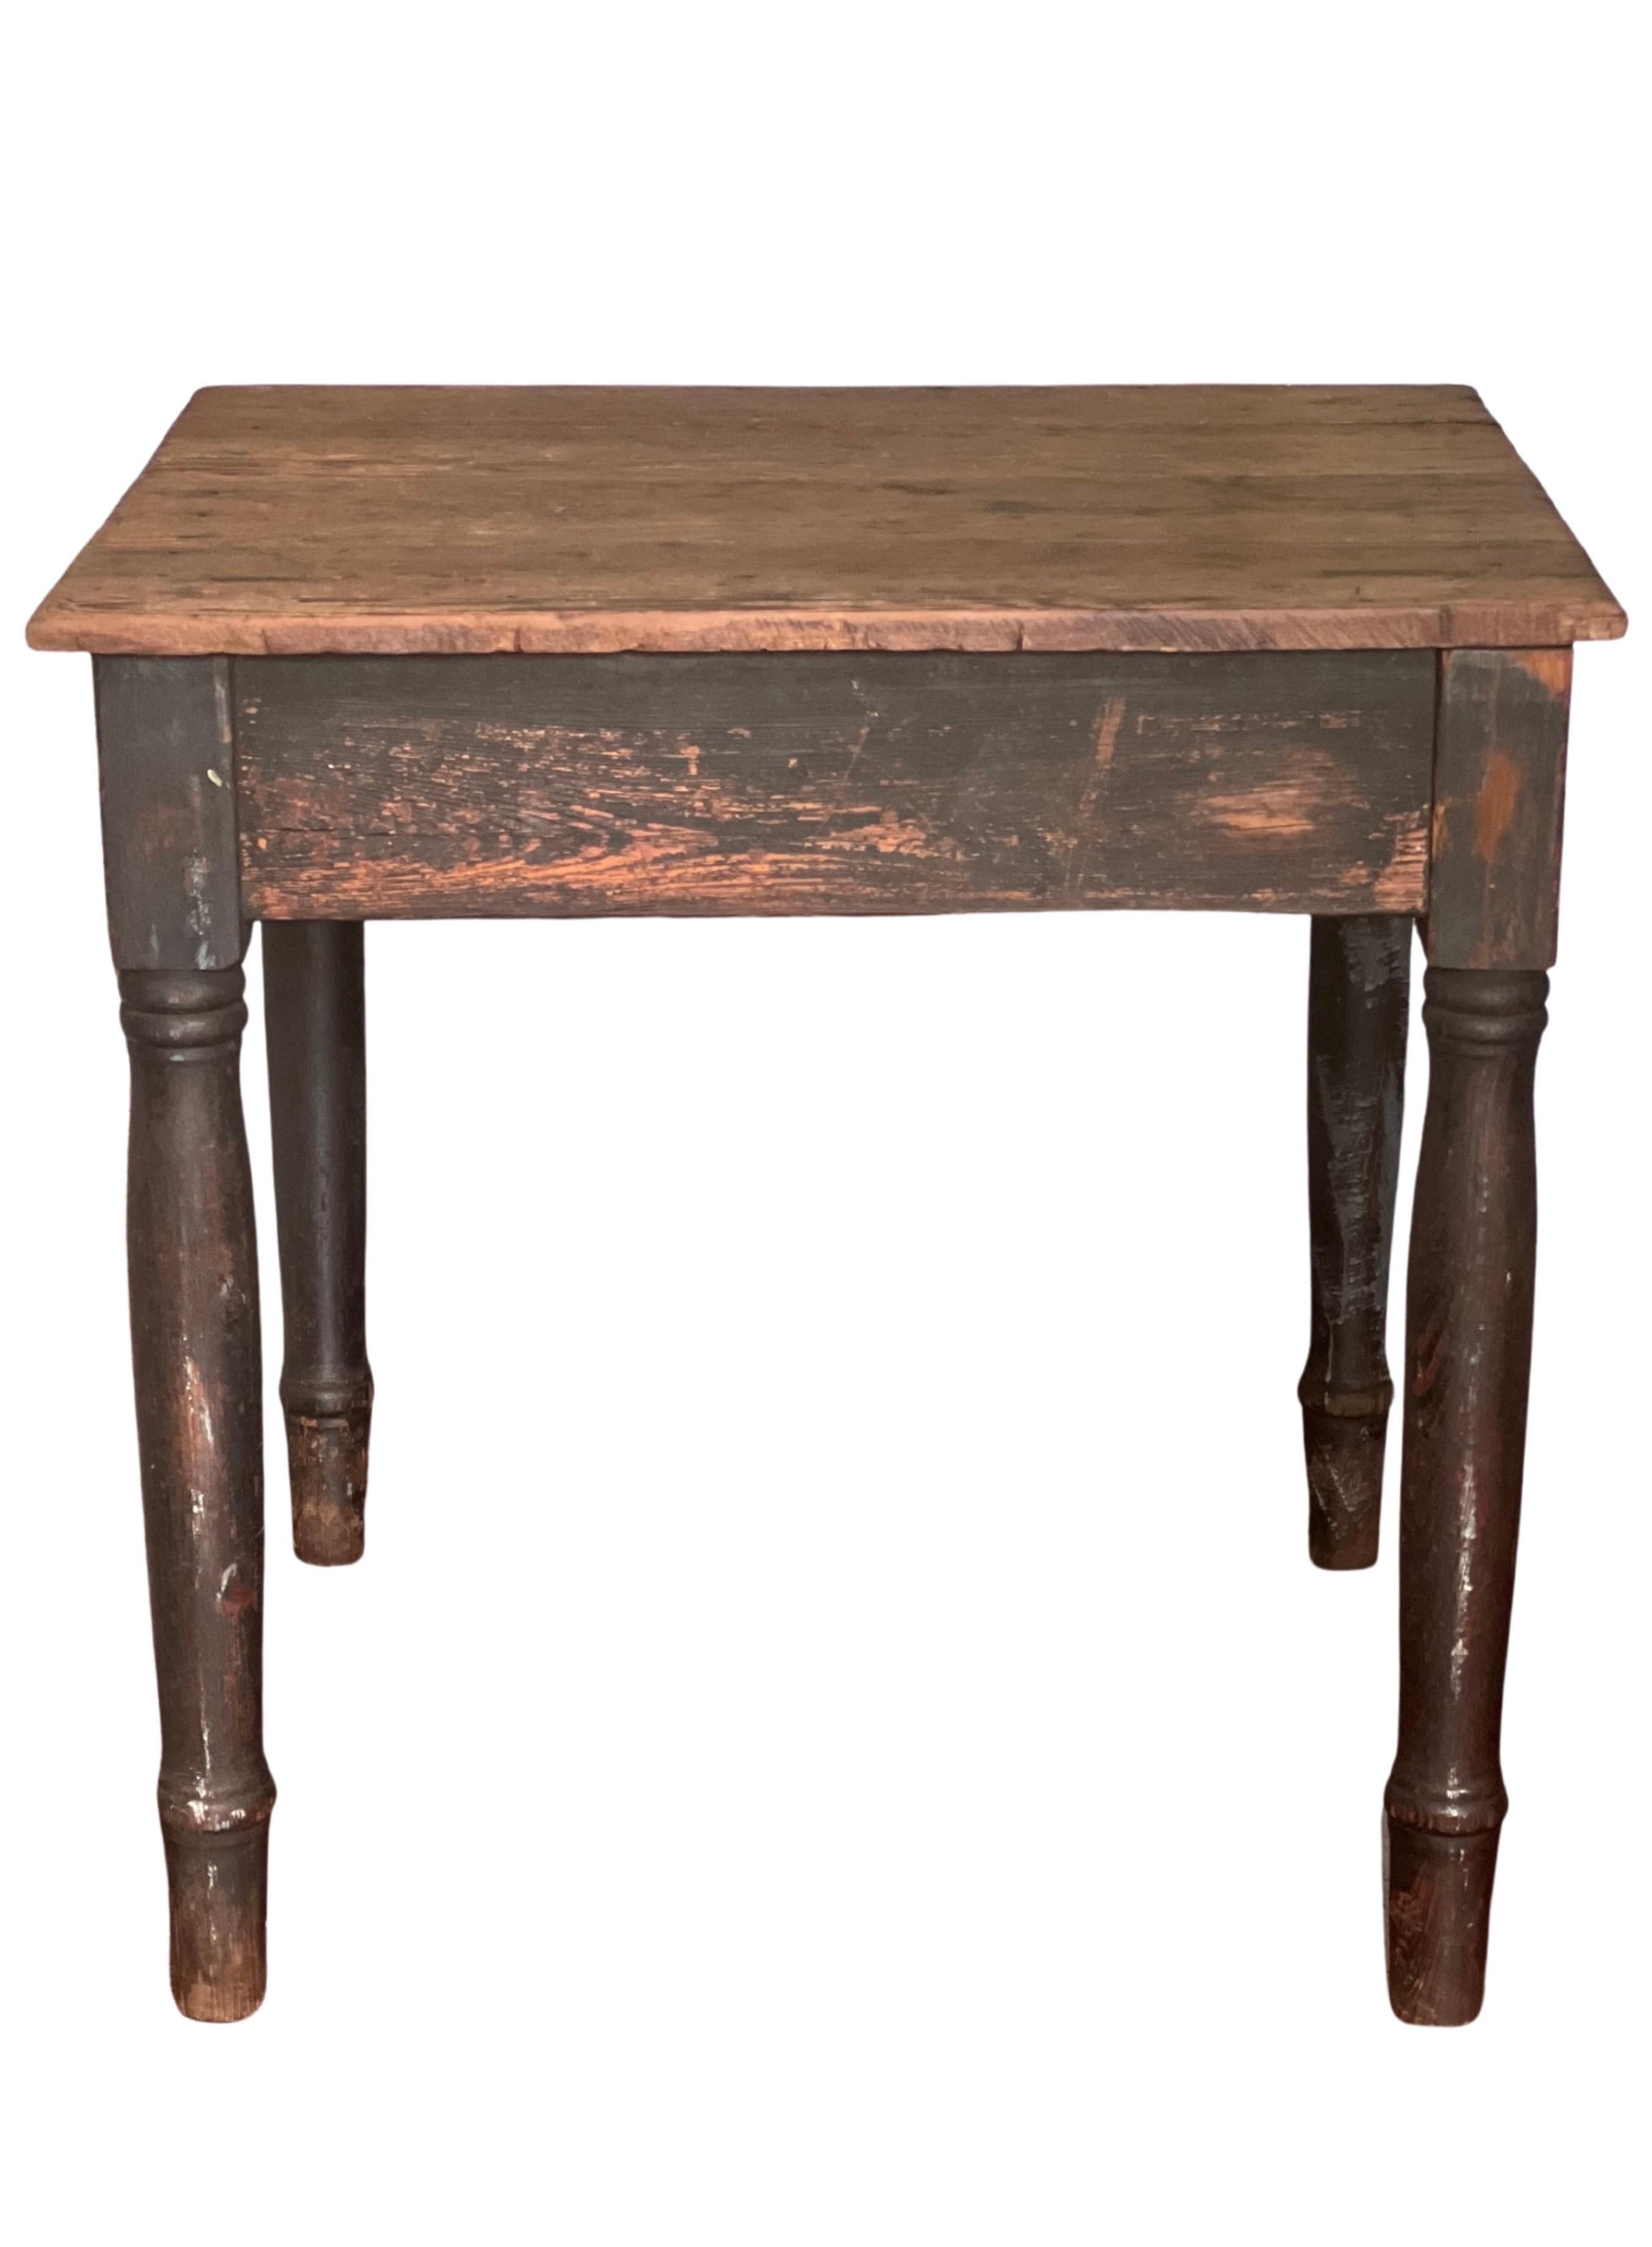 Antique rustic black painted Farmhouse harvest work table, c. 1900.

Gorgeous, super sturdy work table beautifully patinated with original, aged black paint. Wonderful color in a warm, muted black having a naturally distressed finish acquired